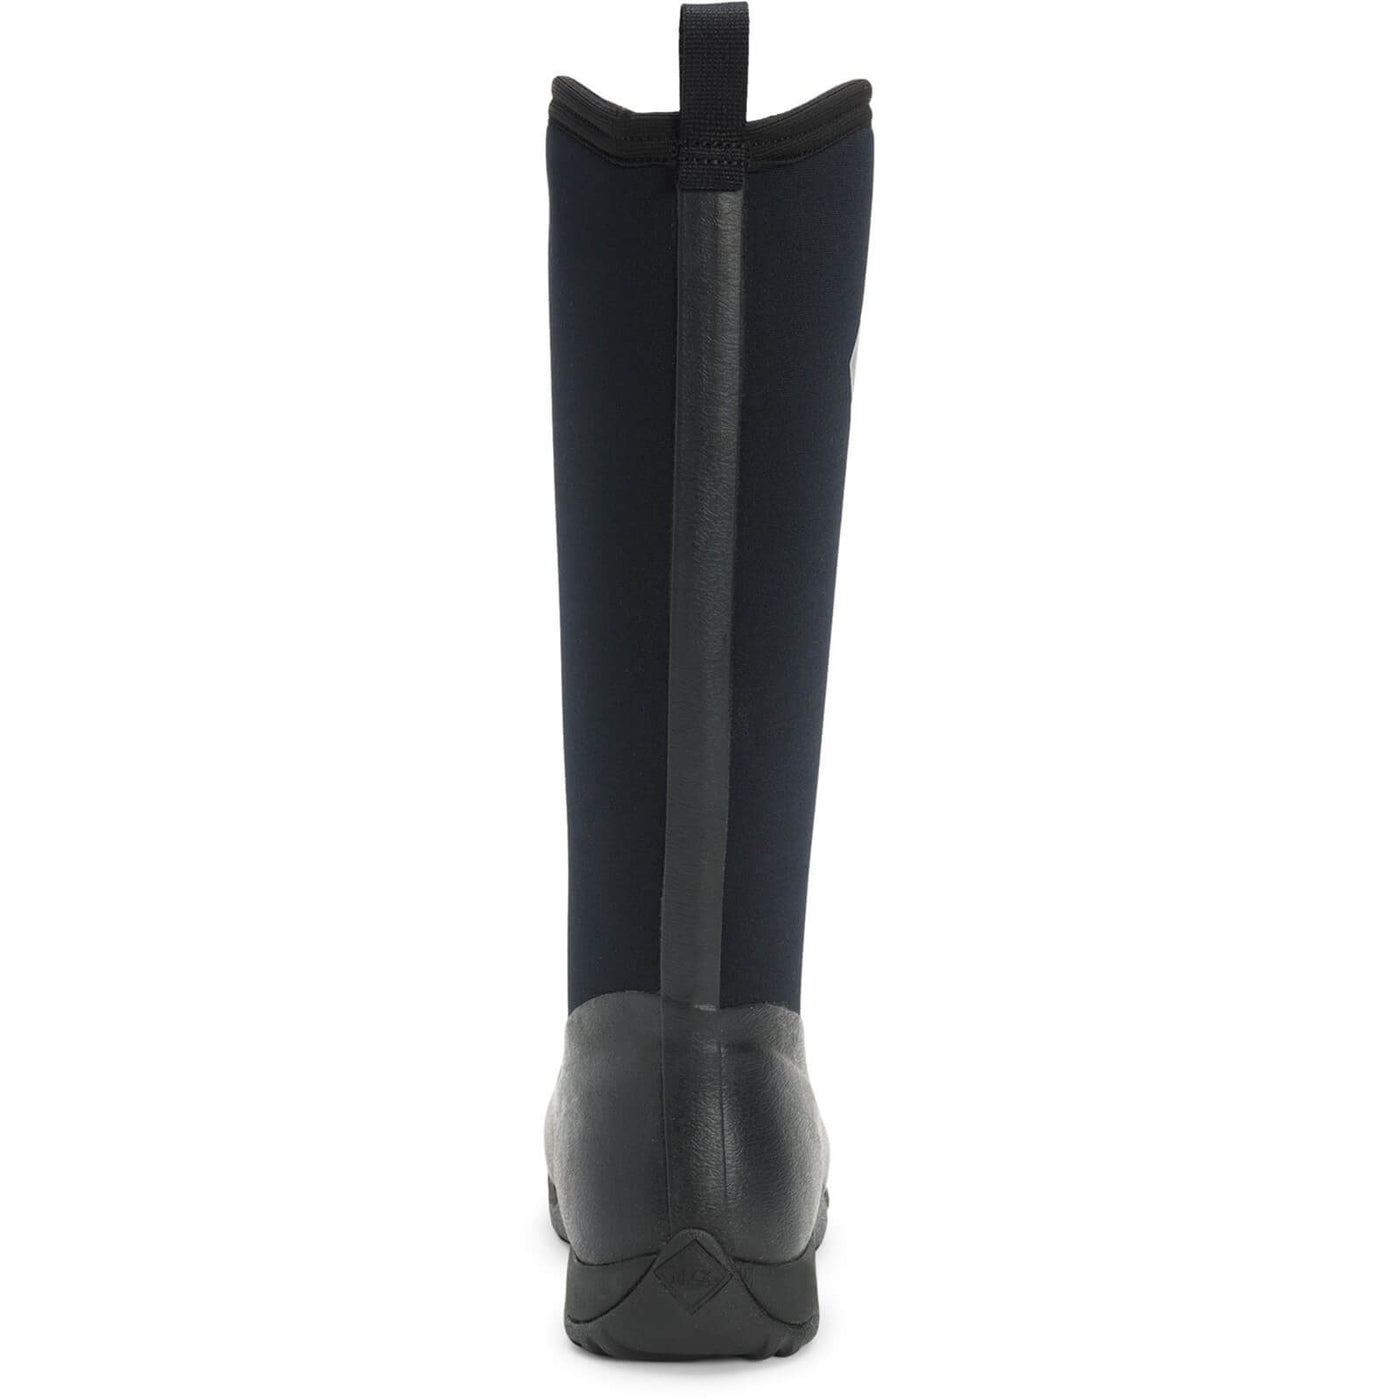 Muck Boots Arctic Adventure Pull On Wellies Black 2#colour_black